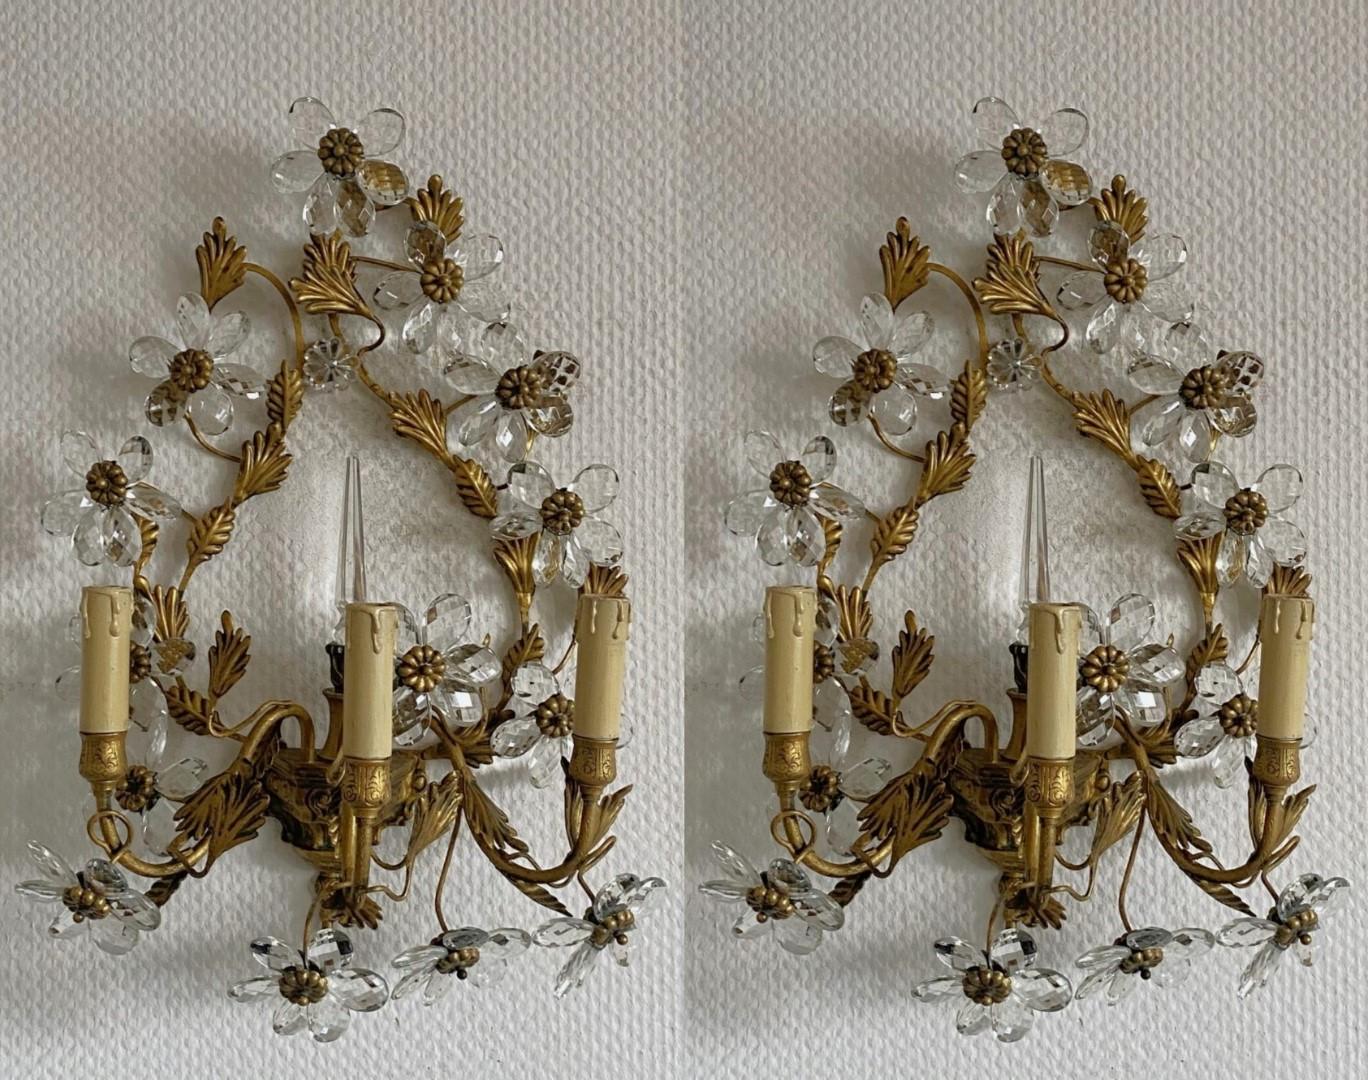 Pair of Large Maison Baguès Wrought Iron Crystal Flower Wall Sconces, 1930s For Sale